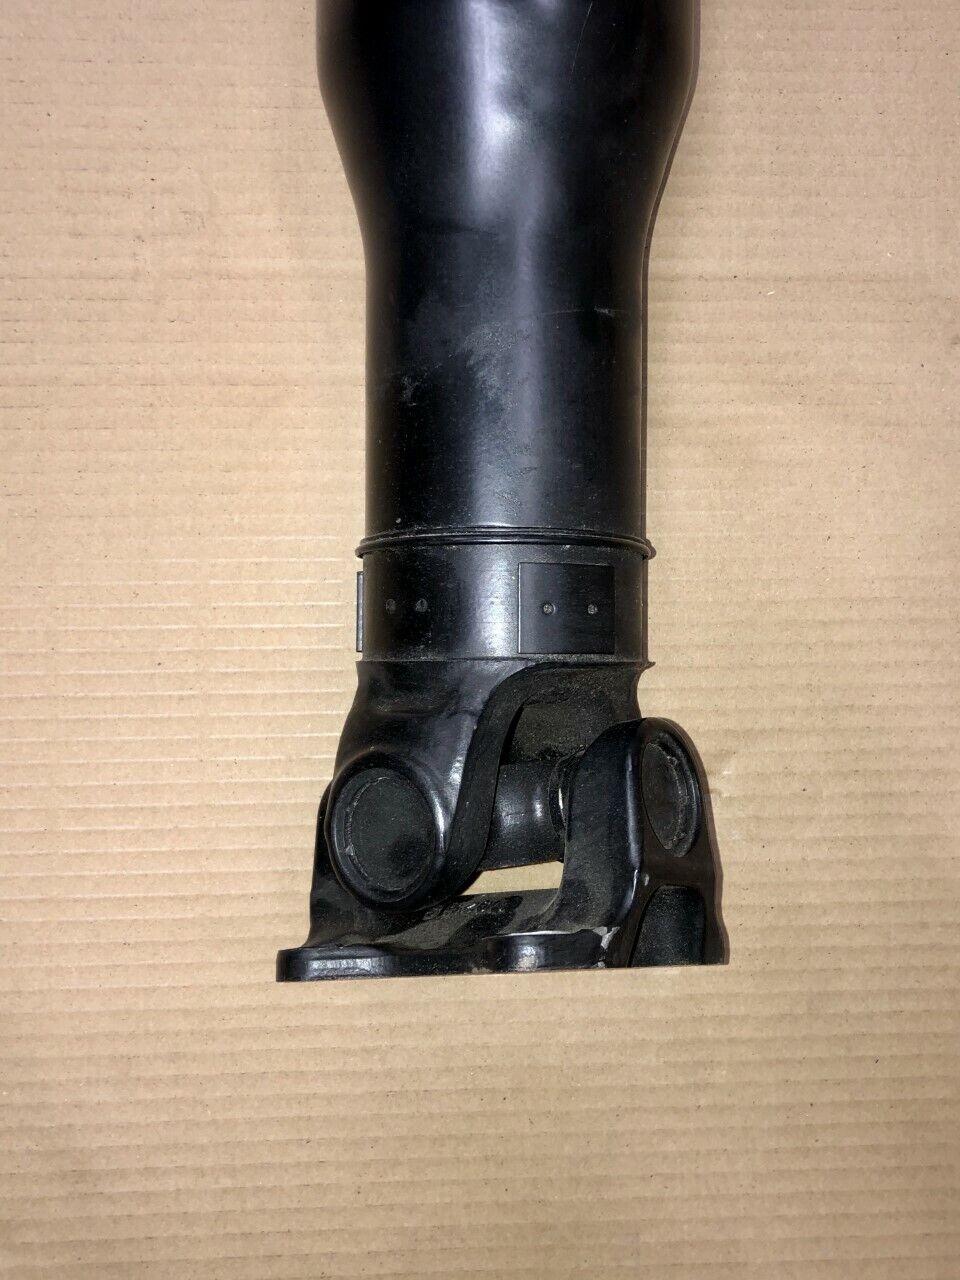 MERCEDES-SPRINTER-BRAND-NEW-PROPSHAFT-REPLACES-OE-A9064105406-A9064103116-186027250705-3